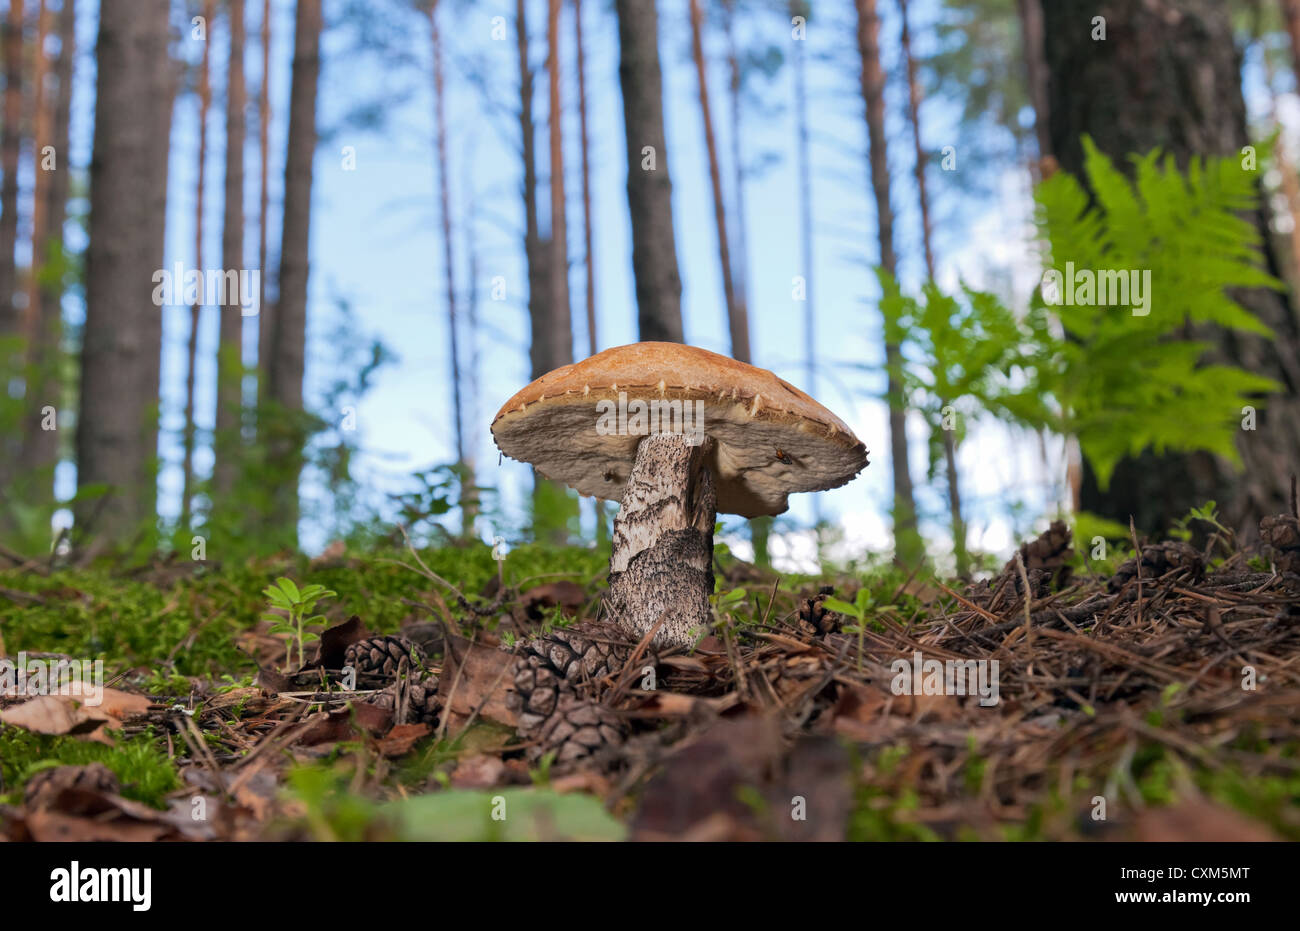 Forest mushroom in the grass. Stock Photo